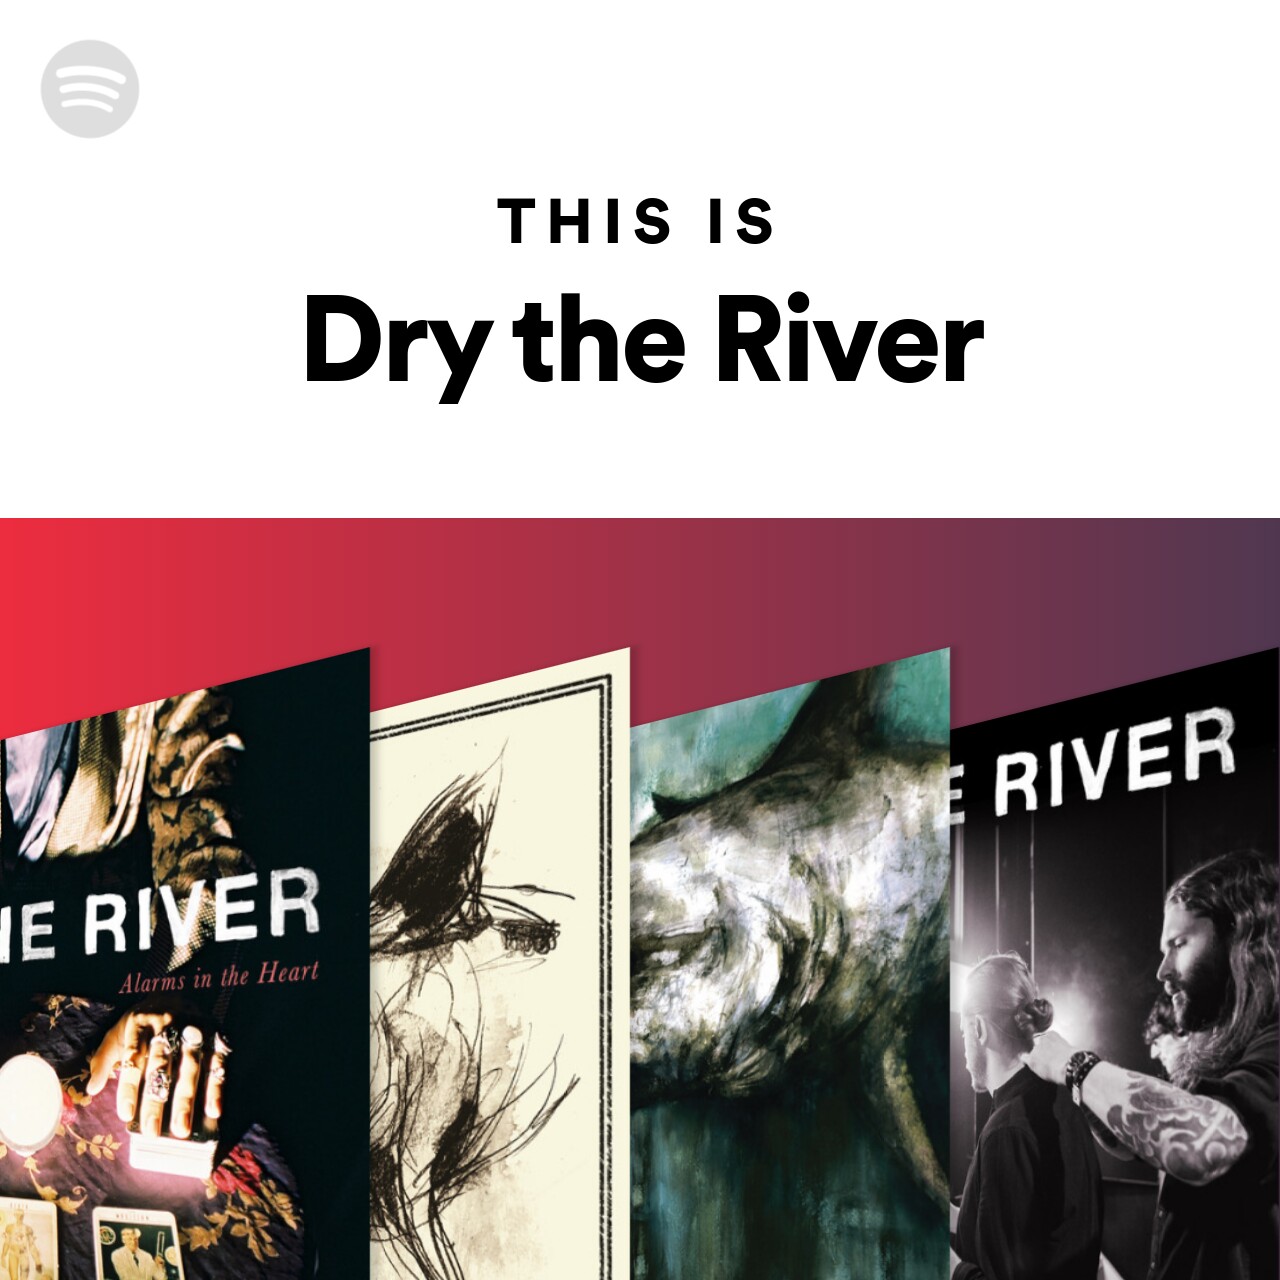 This Is Dry the River